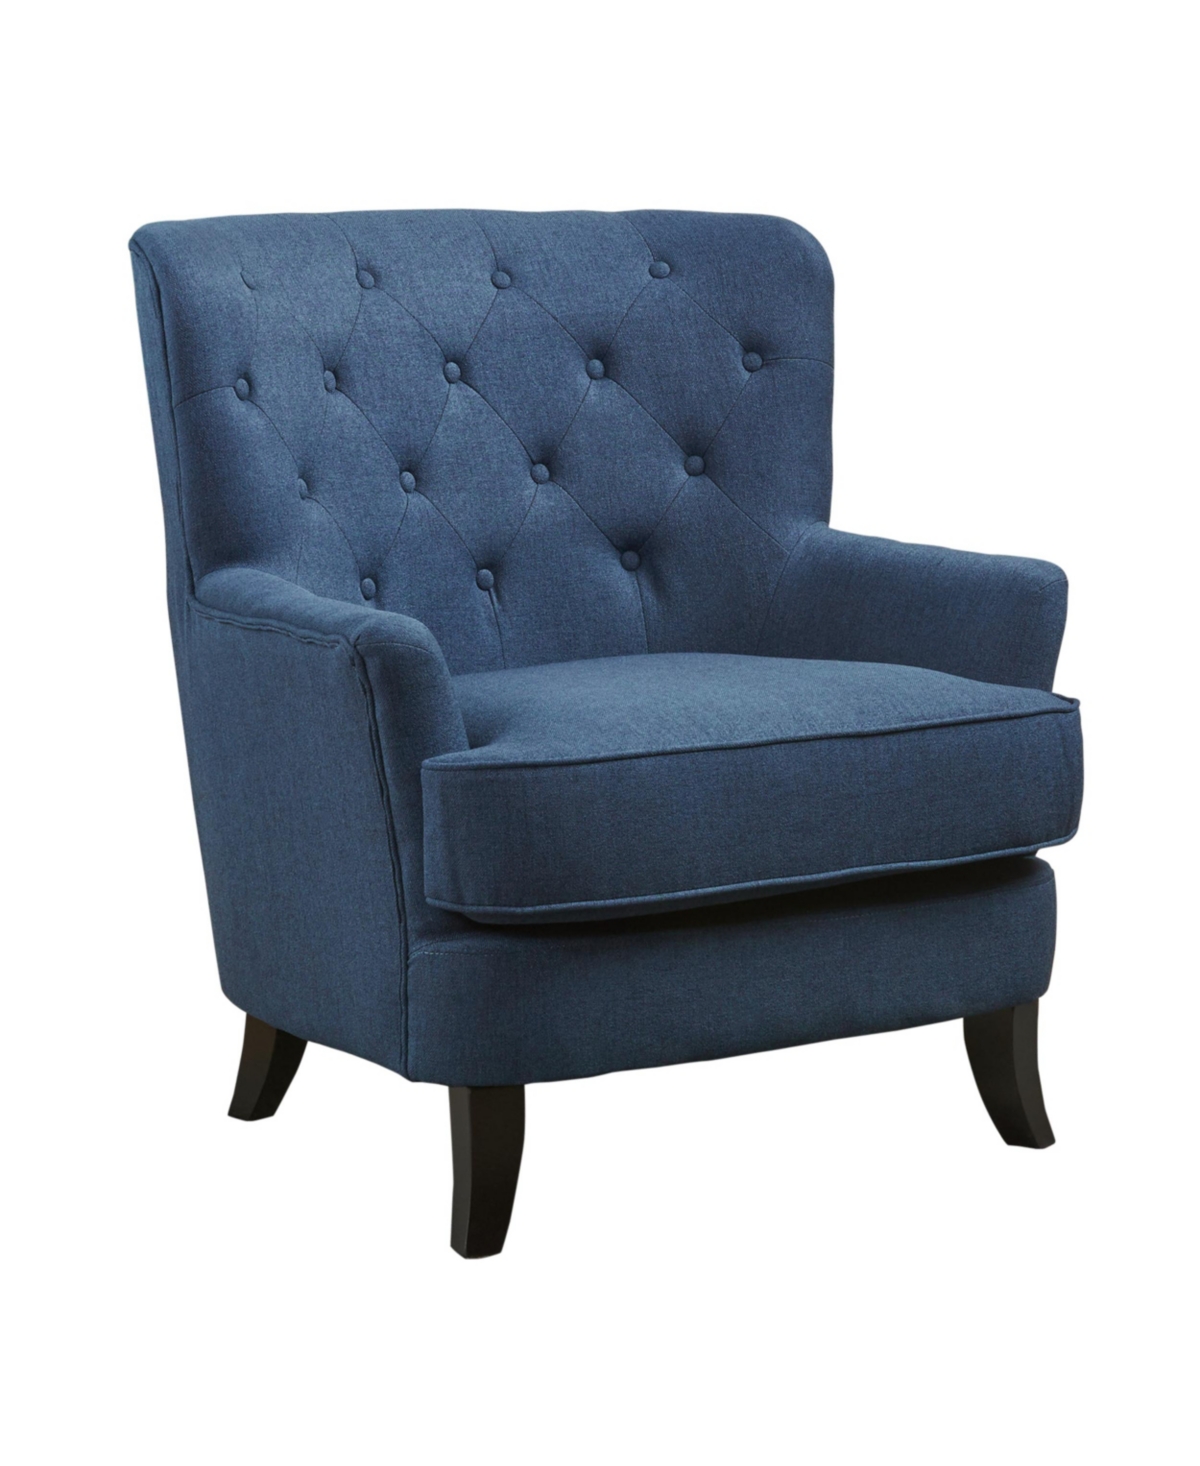 Noble House Anikki Tufted Club Chair In Navy Blue